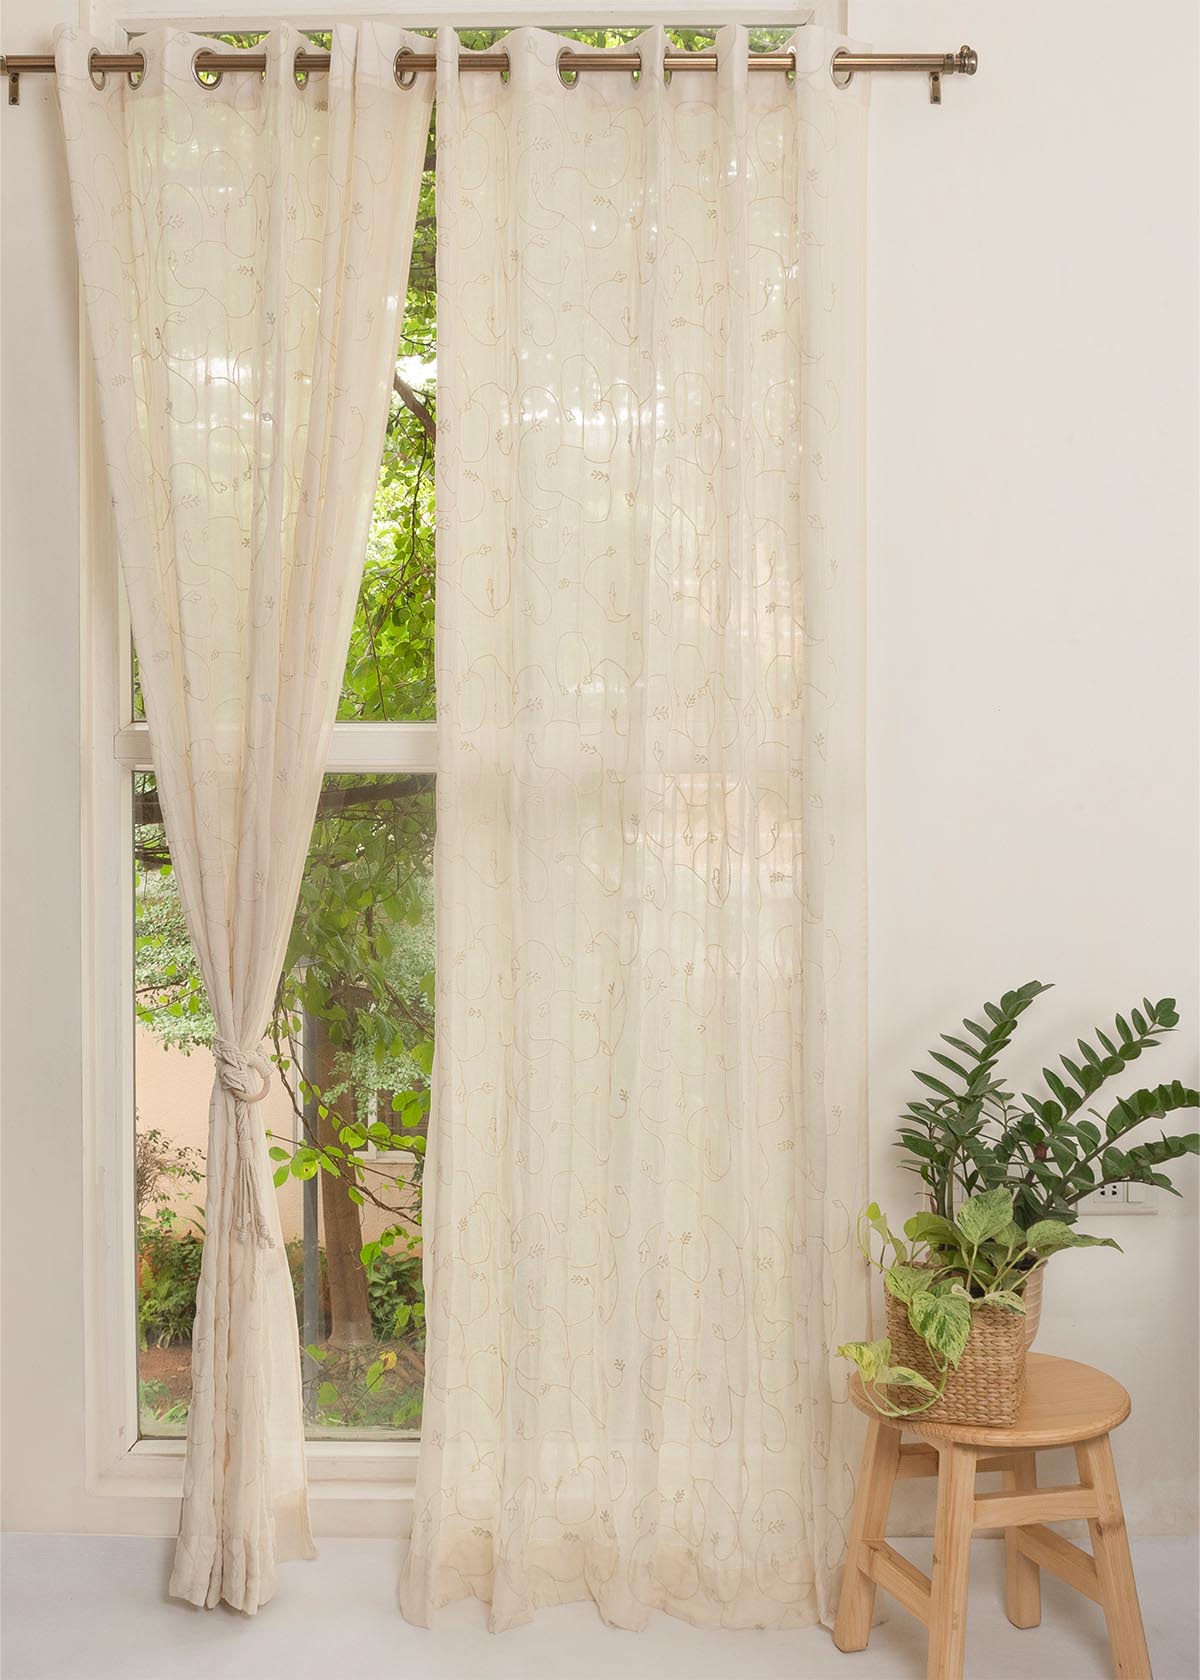 Ivy Vines Embroidered Sheer Curtain - Cream